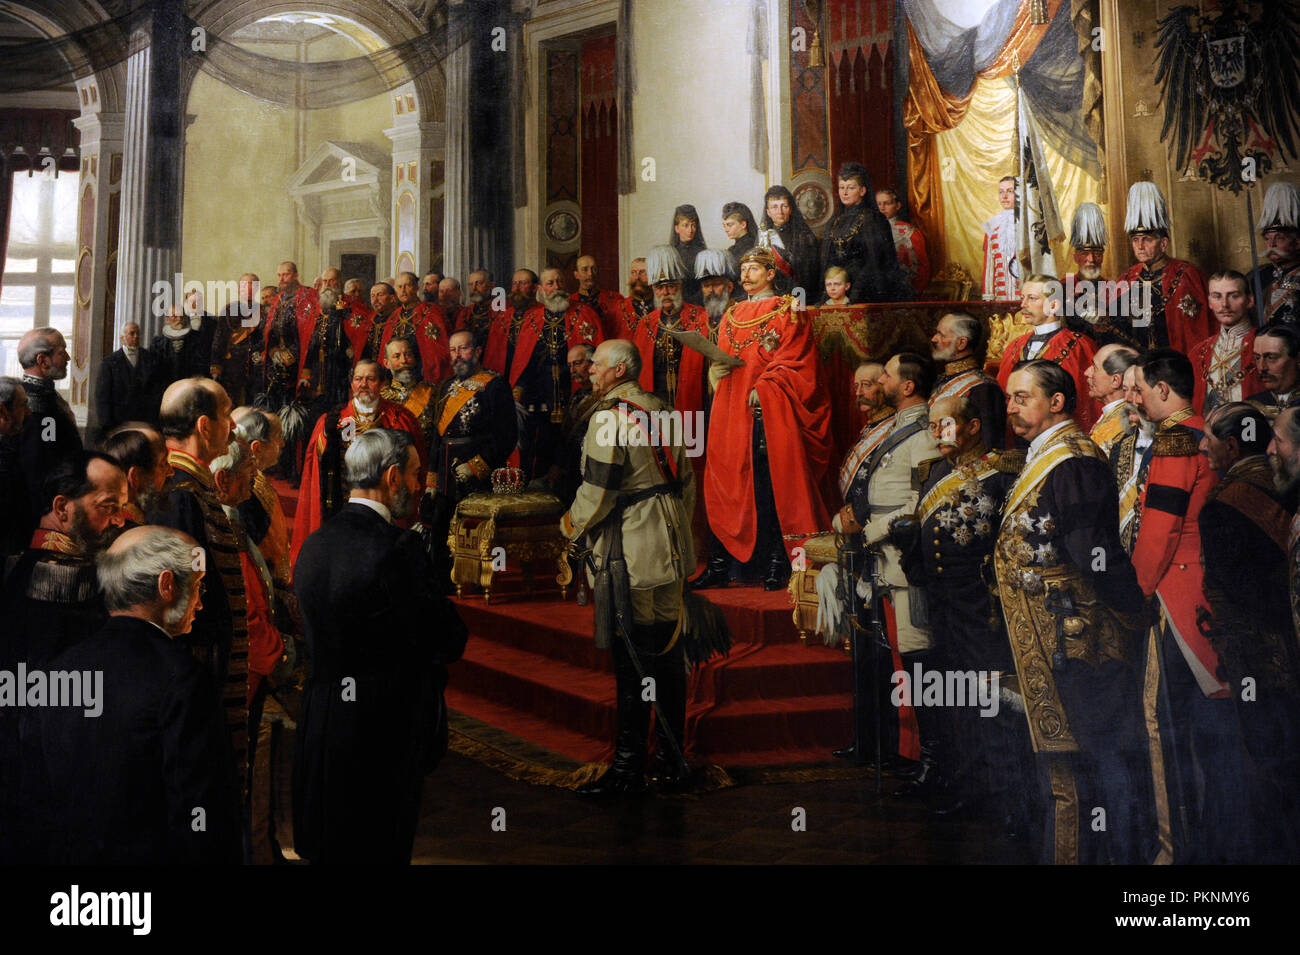 The Opening of the German Reichstag in the White Hall of the Berlin Schloss by Kaiser Wilhelm II on June 25, 1888. Painting finished in 1893 by Anton Von Werner (1843-1915). Detail. German Historical Museum, Berlin. Germany. Stock Photo